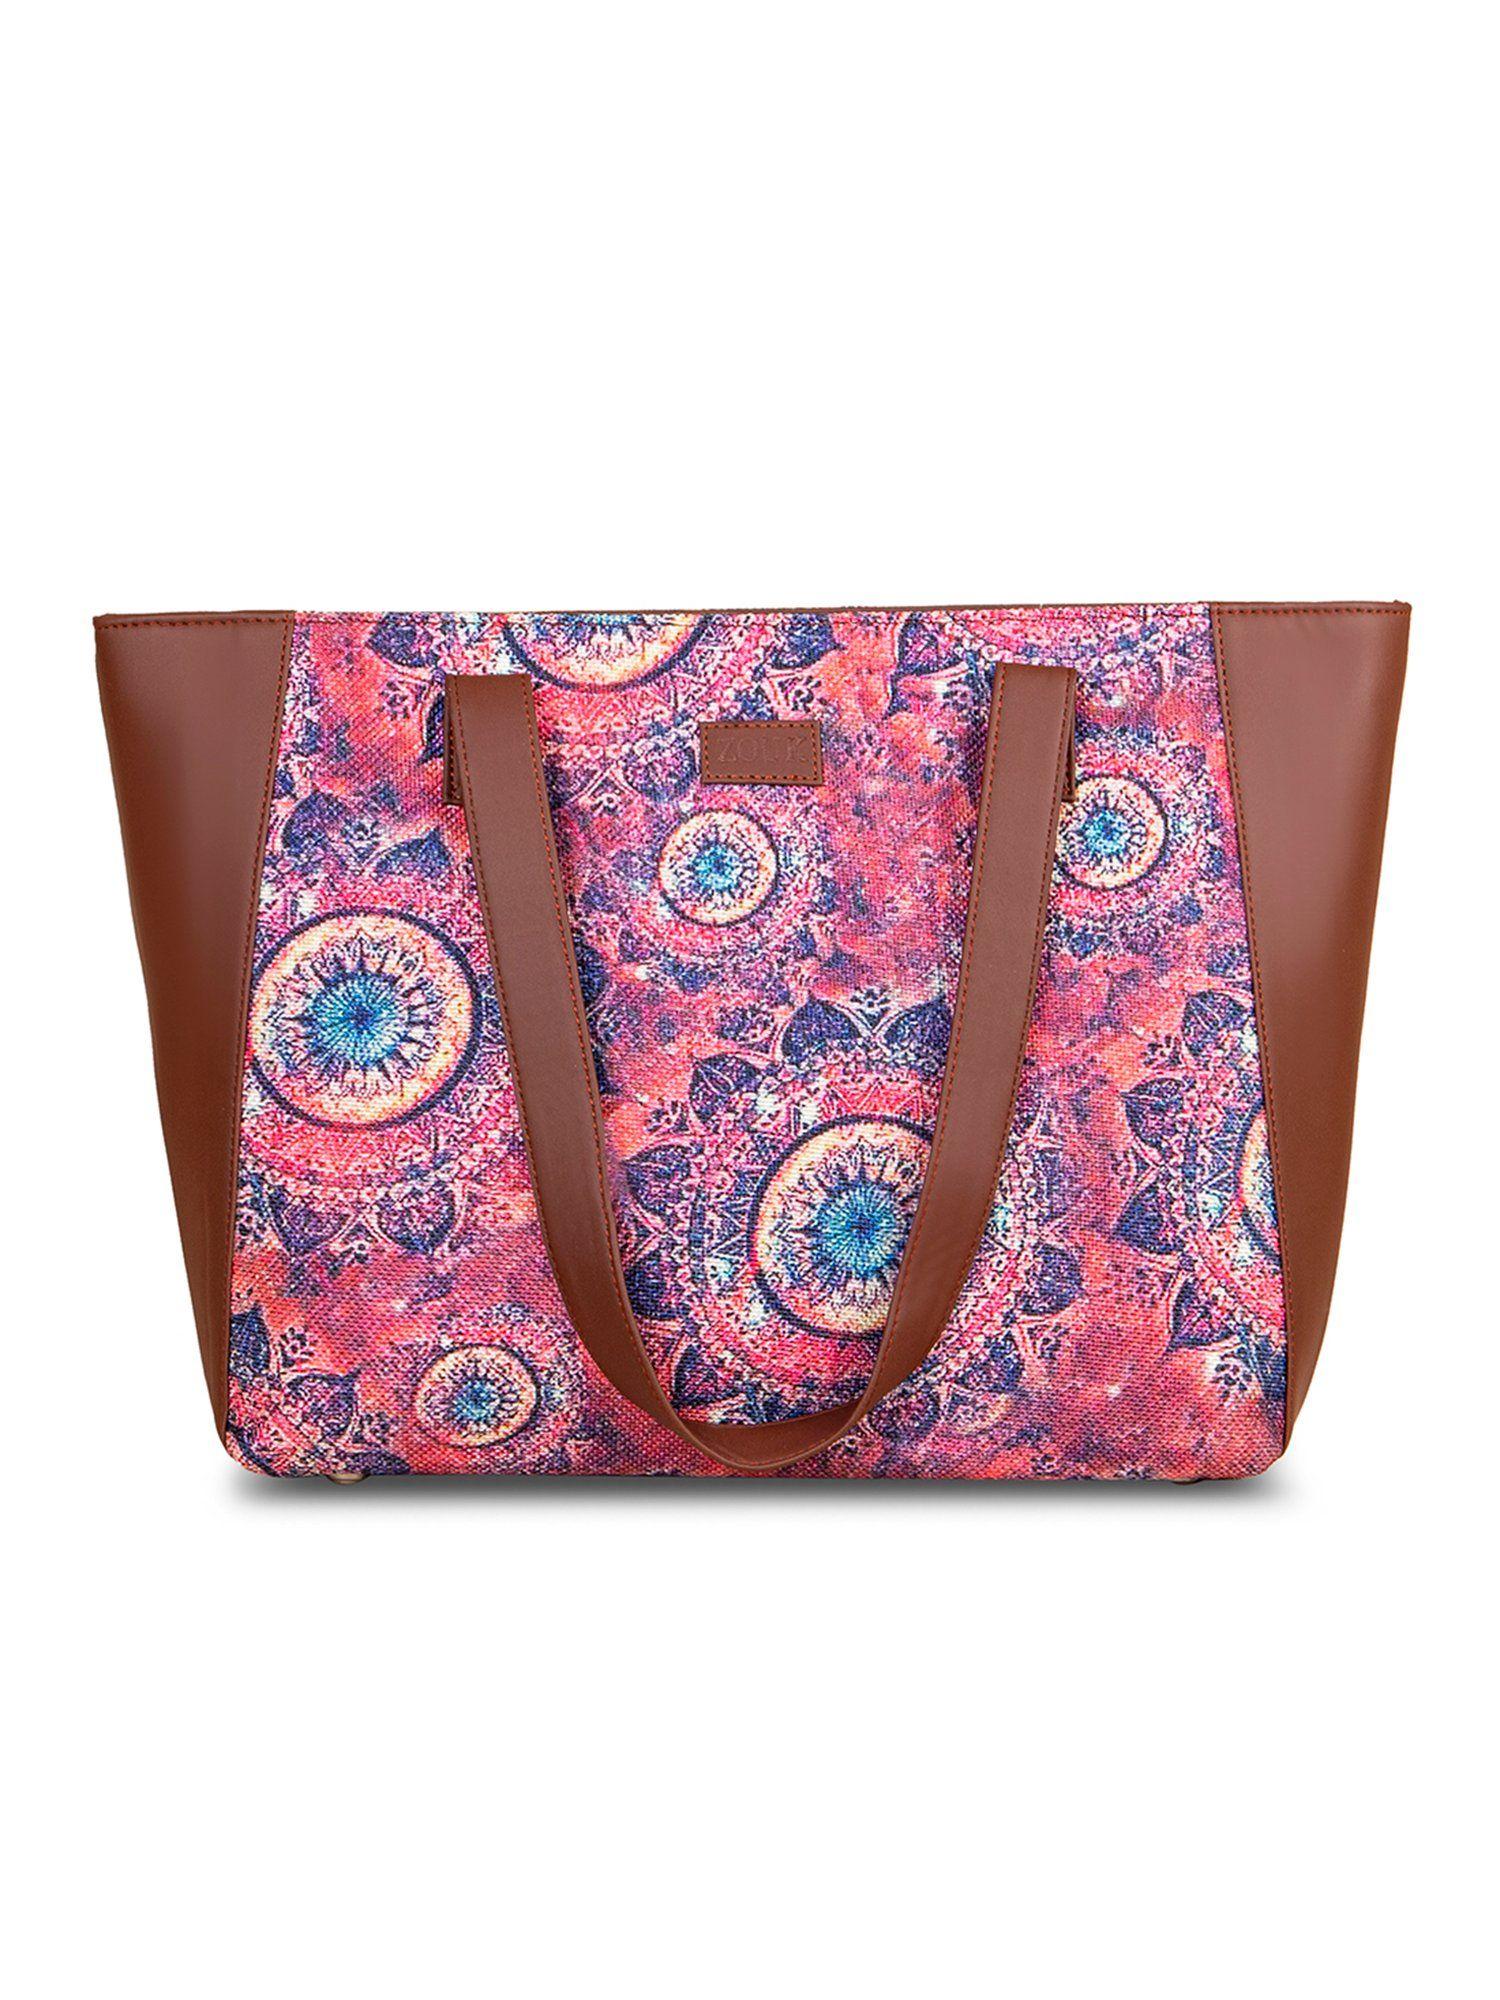 Women Handcrafted Chakra Printed Side Tote Bag & Handbag for Office and College-Pink